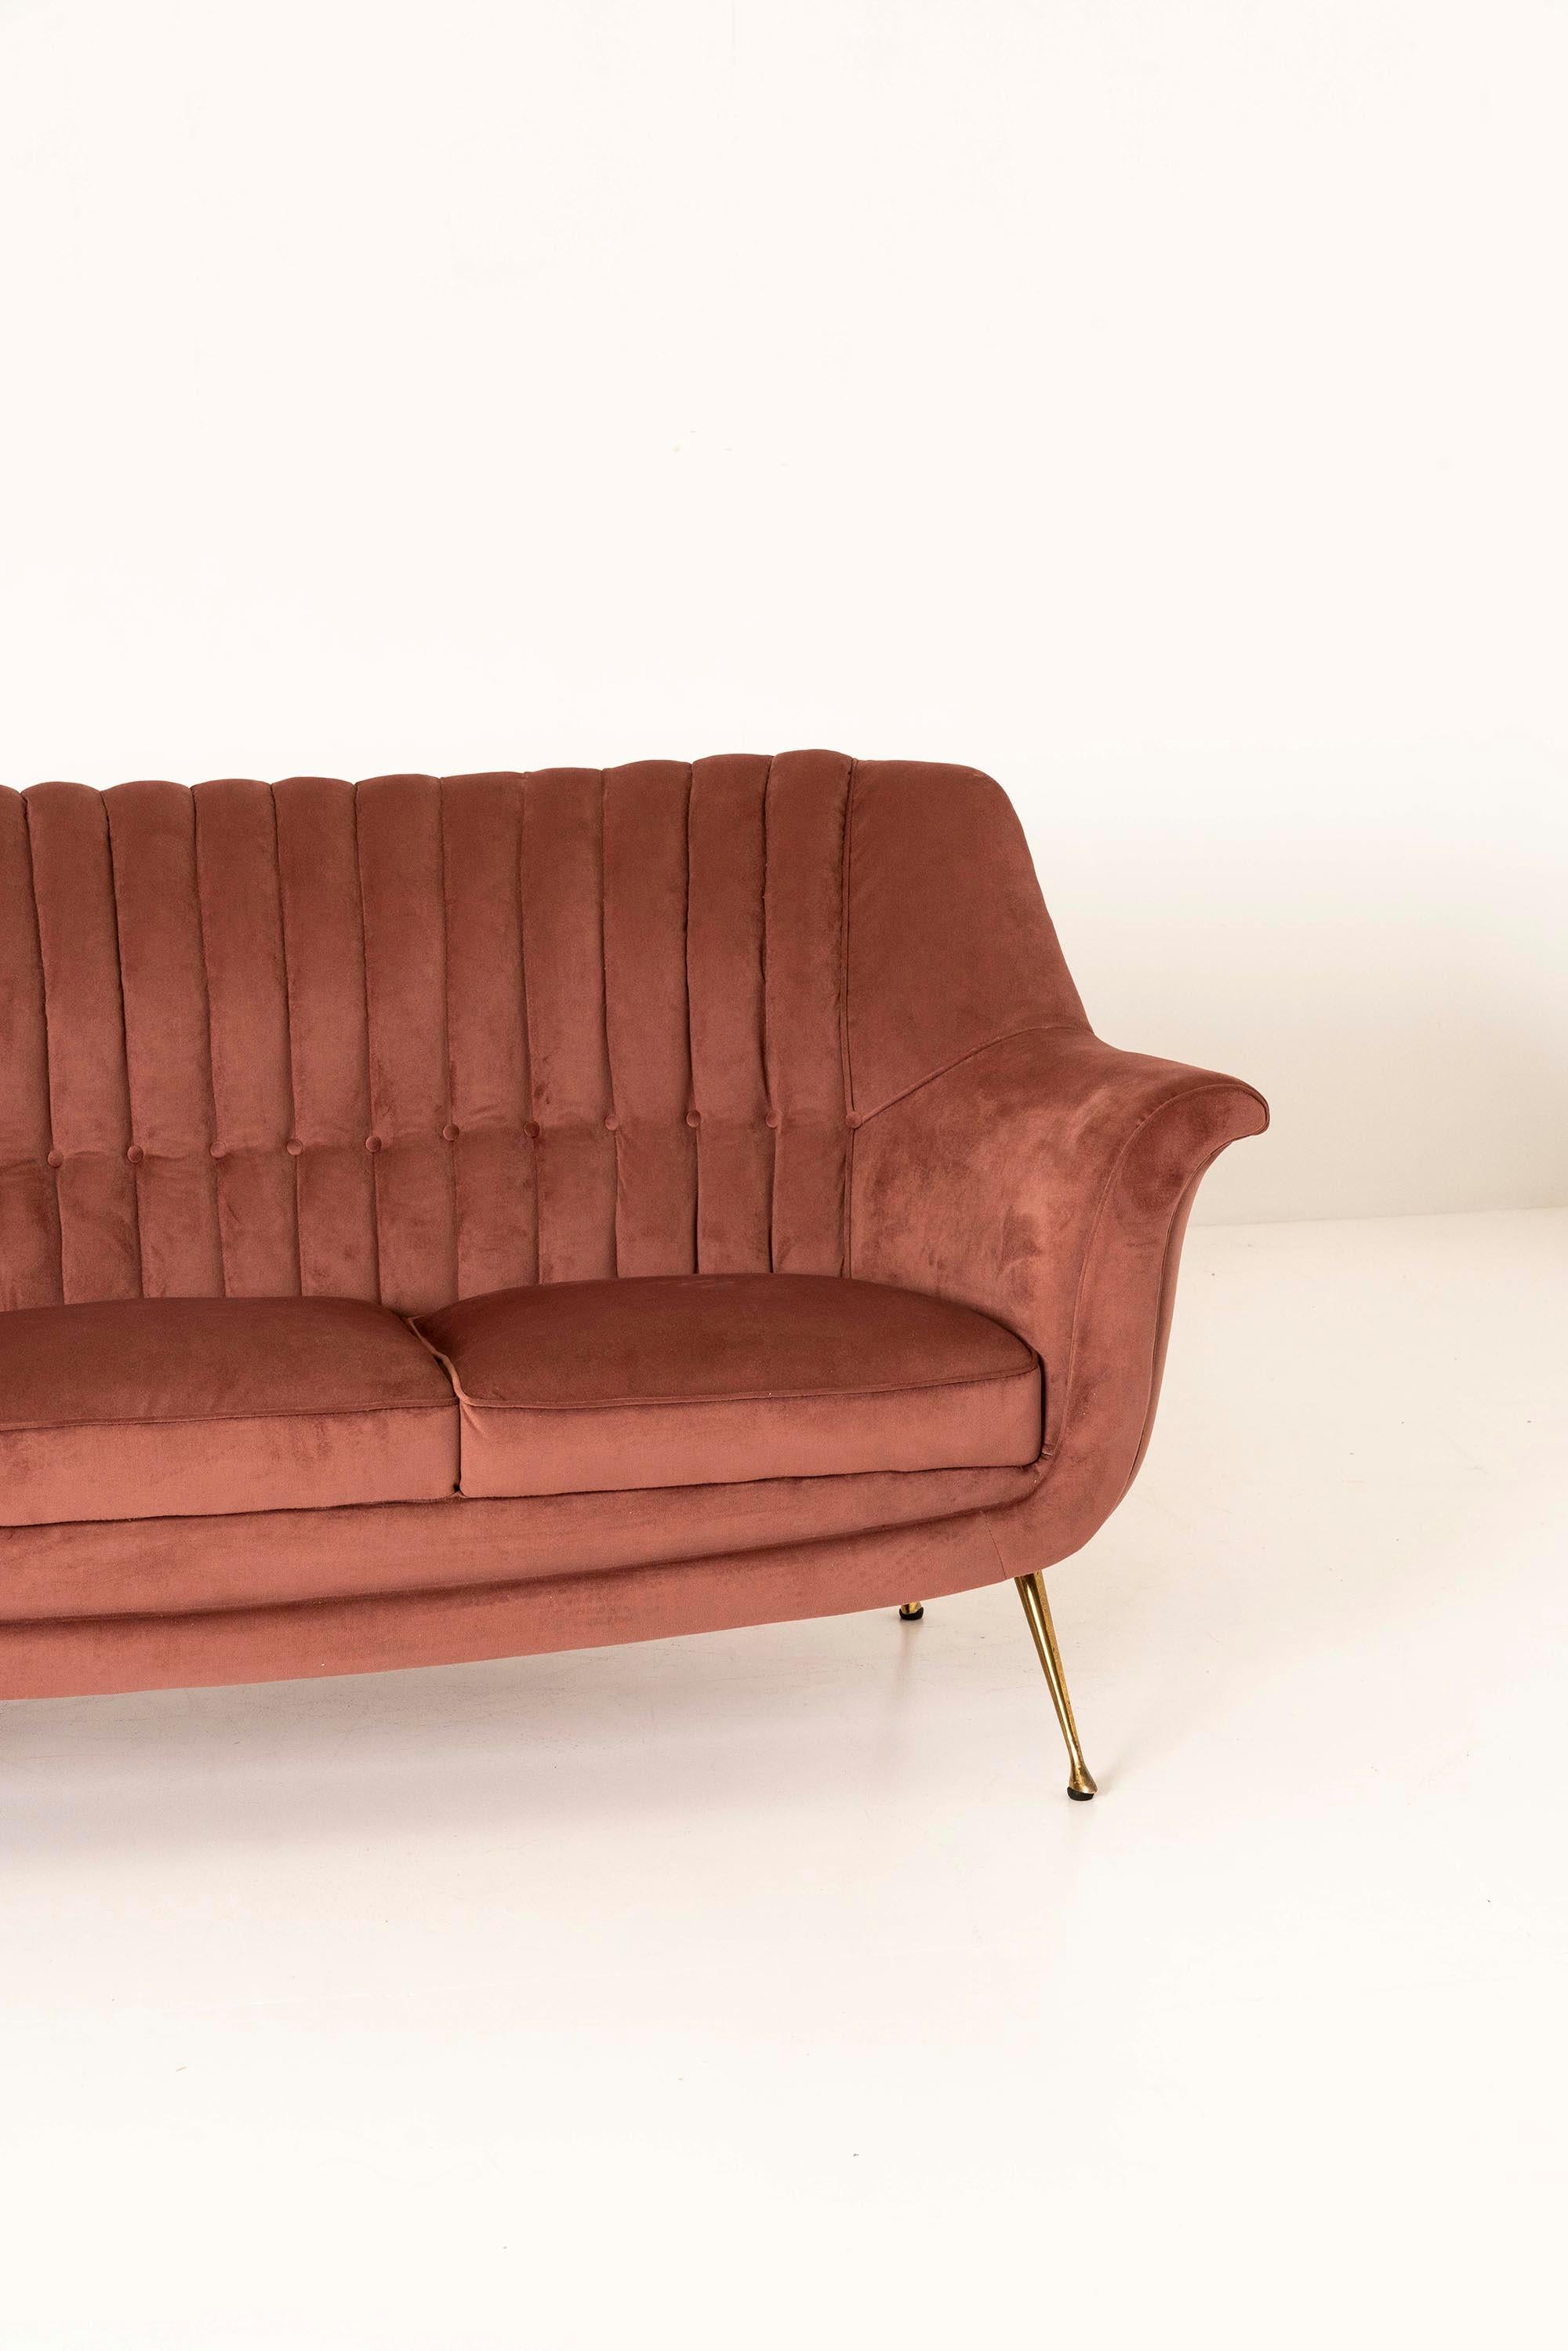 Mid-Century Modern Italian Three-Seater Sofa in Pink Velvet and Brass, 1950s For Sale